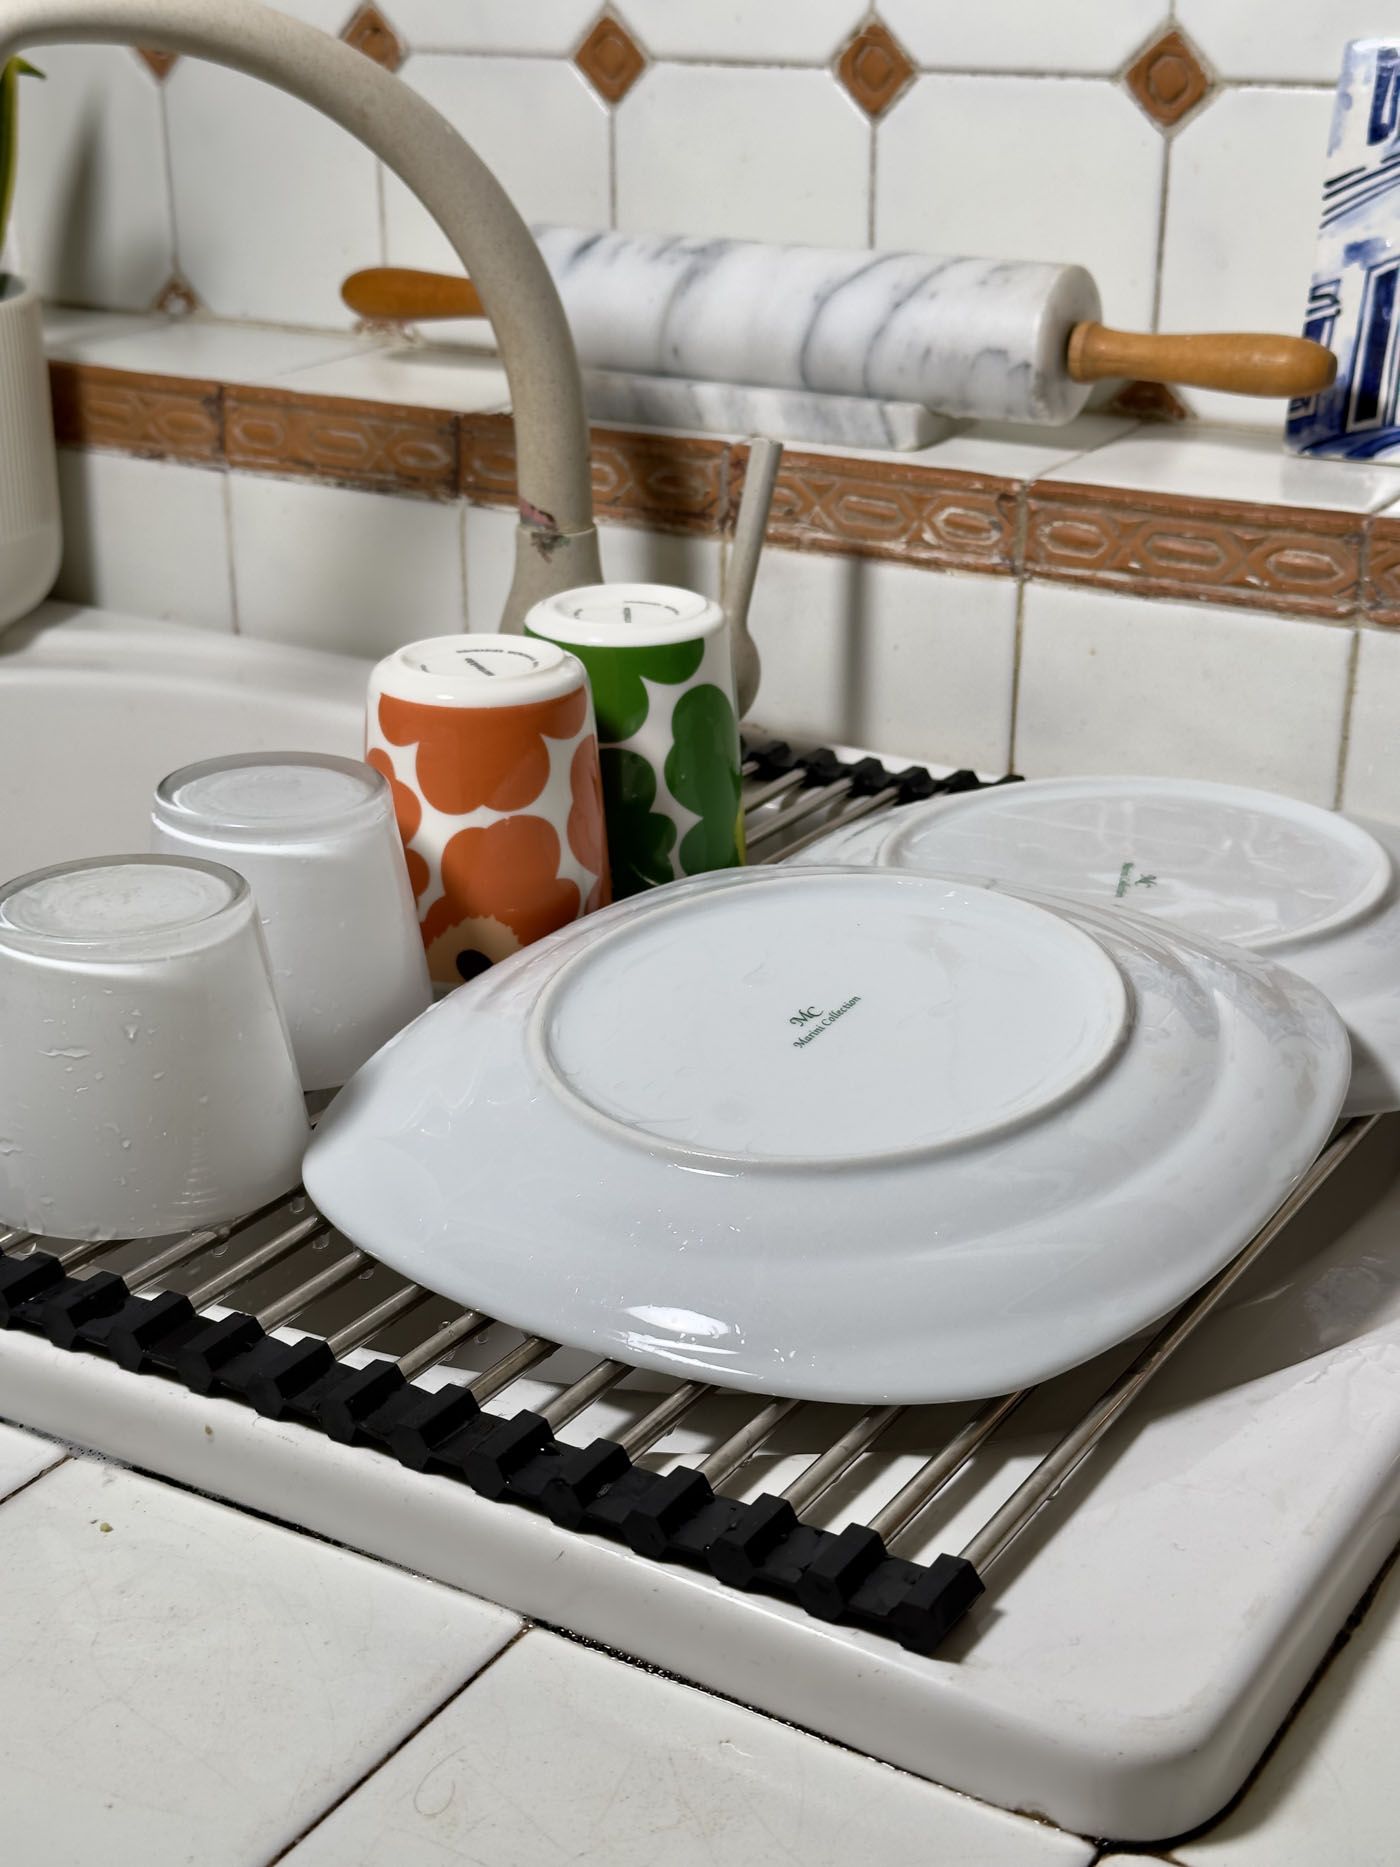 Get A Removable Dish Rack